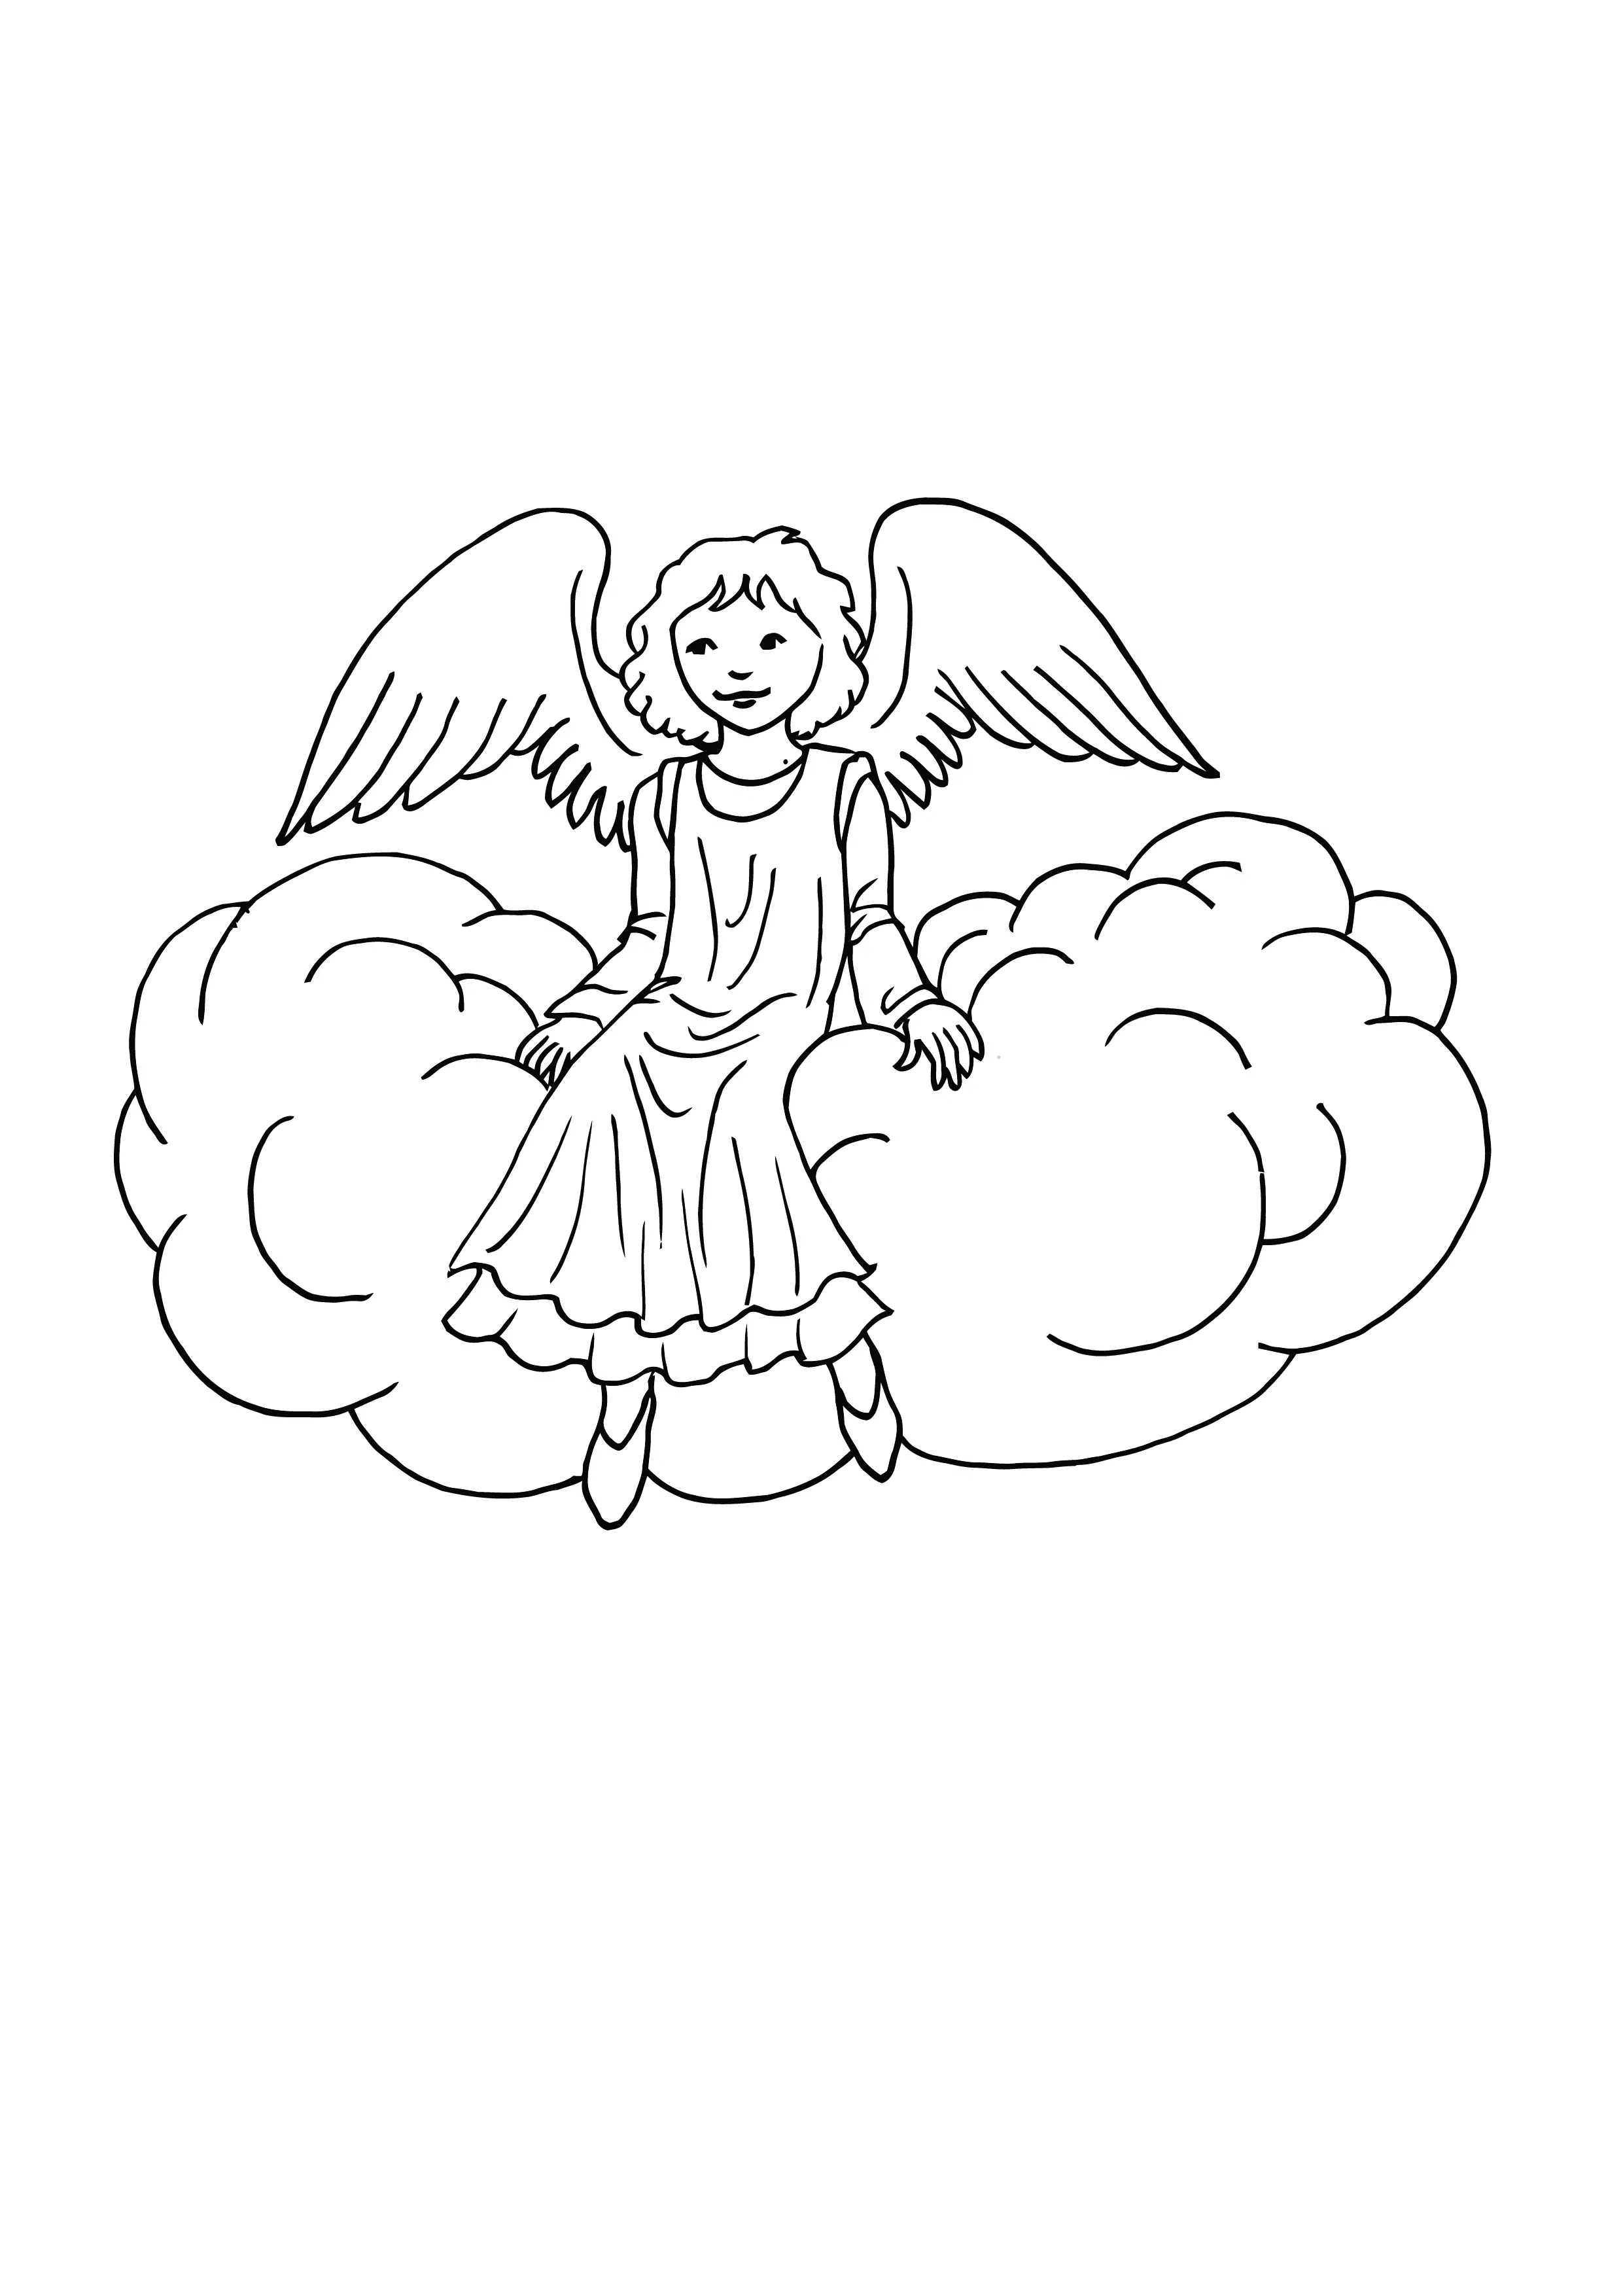 Christian Christmas Angel With Wings SITTING ON CLOUD friendly Free Clipart Coloring Pages for Kids Art Activities Line Art